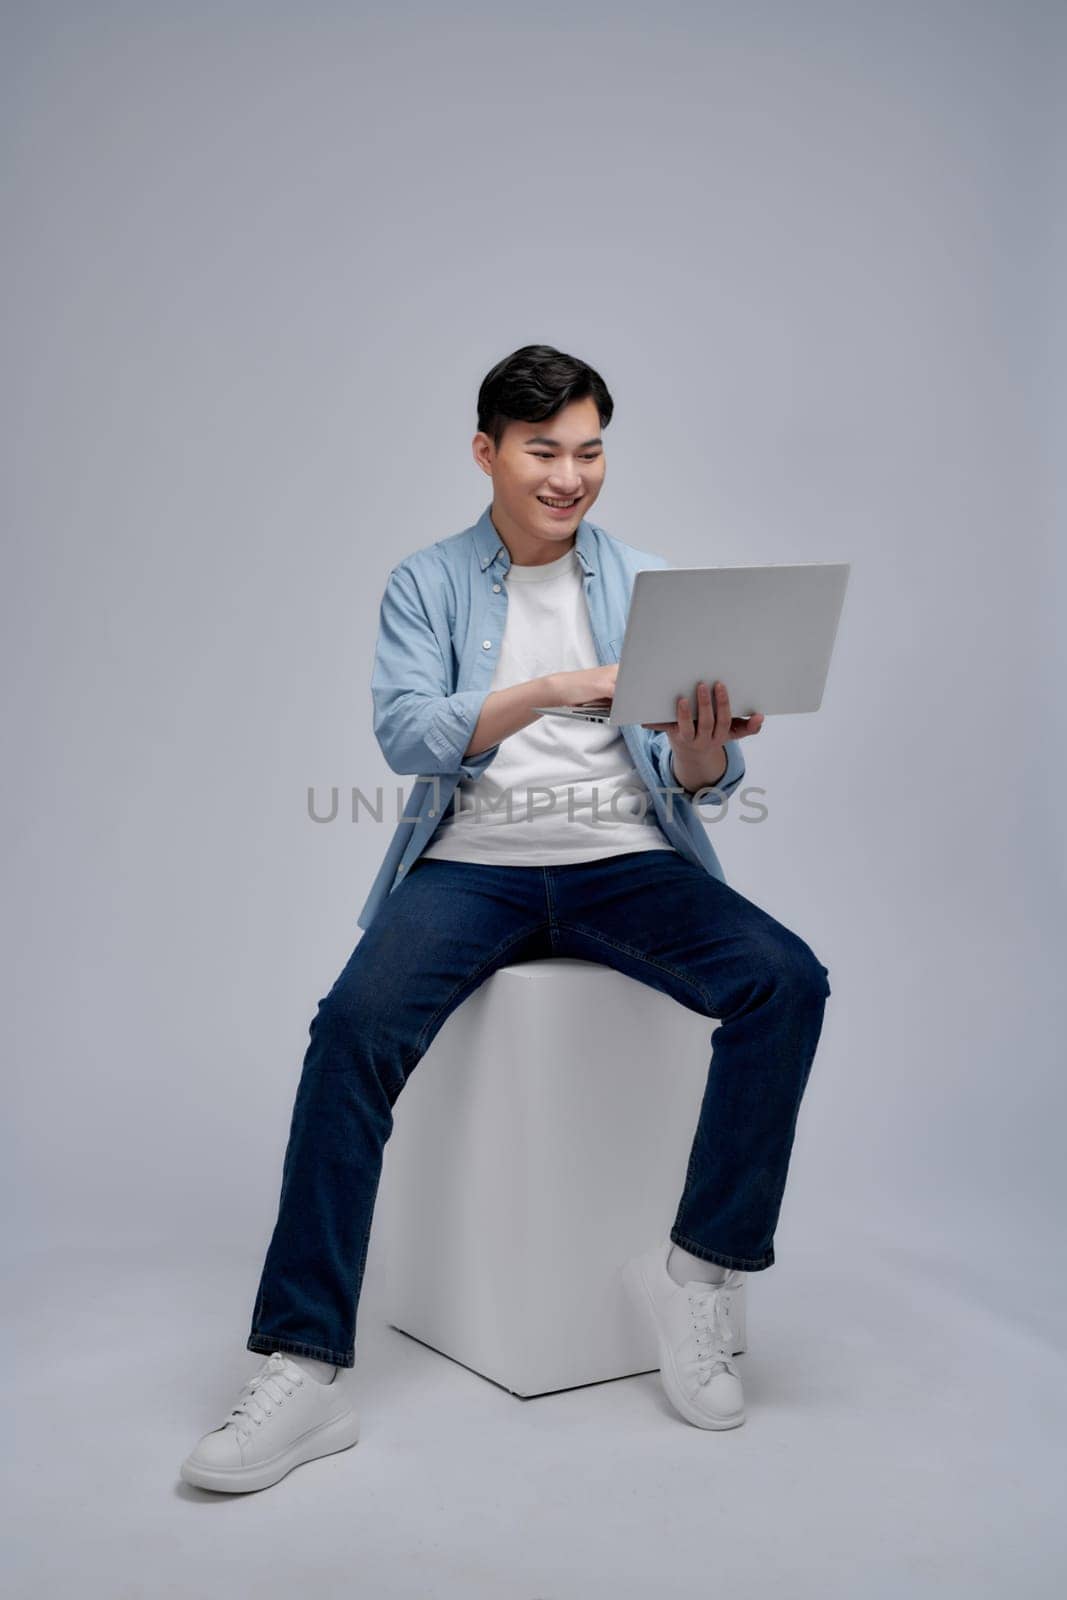 Young Asian man sitting and using laptop on white background